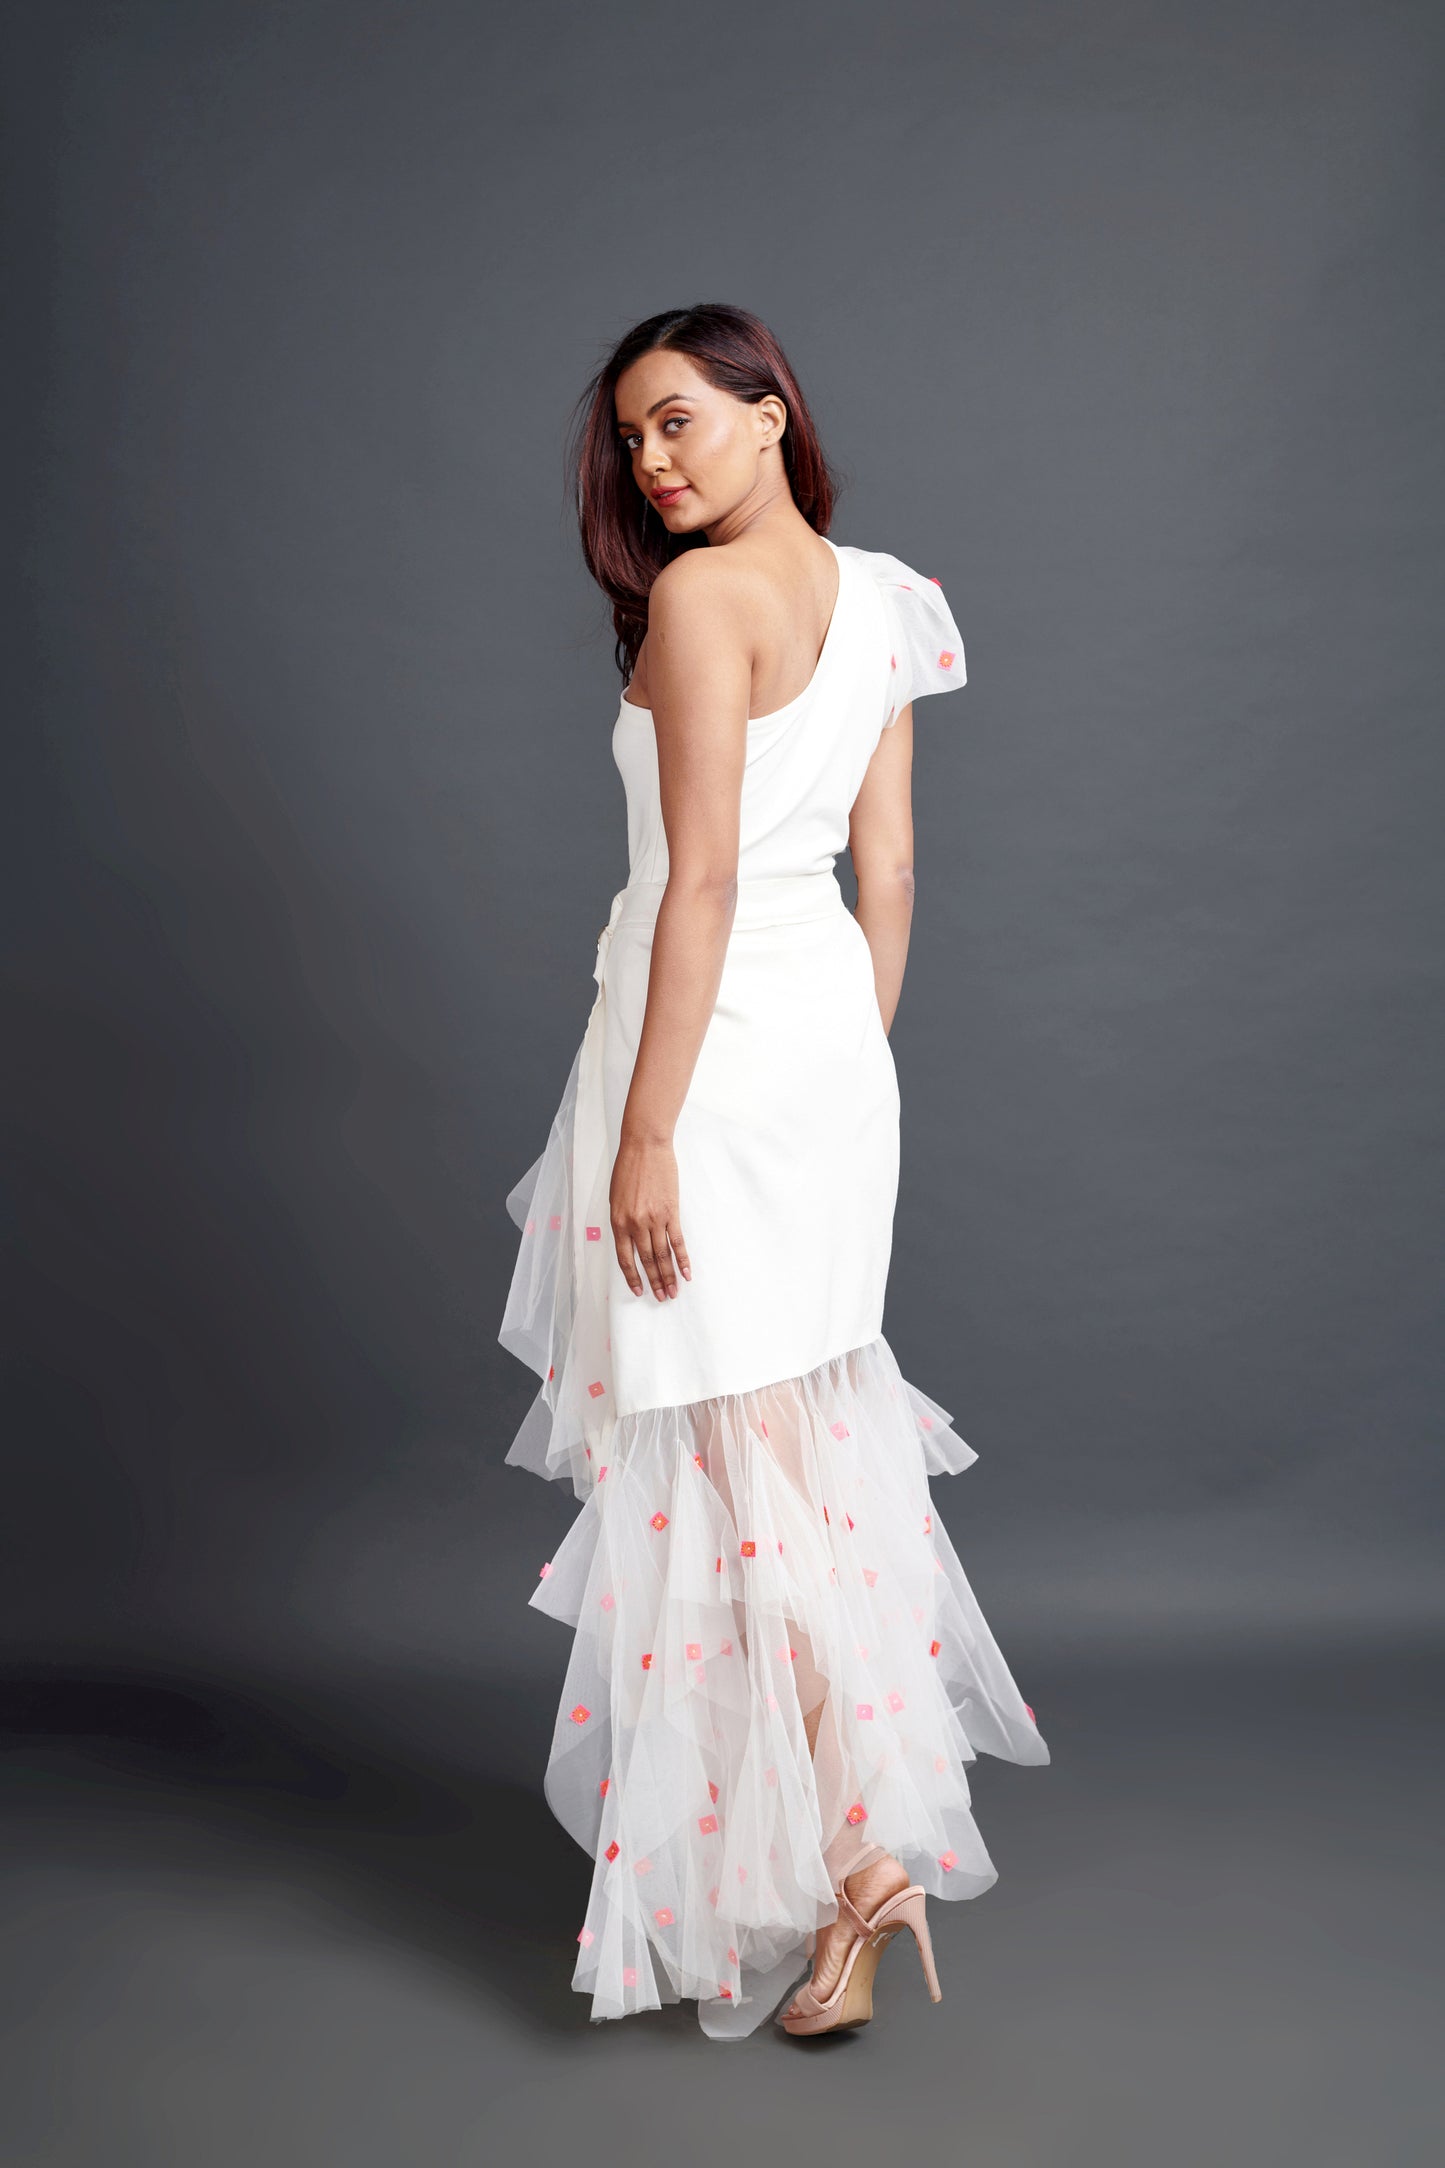 Image of WHITE ONE SHOULDER BODY SUIT WITH CONFETTI DETAILING ON A HIGH-LOW LONG SKIRT. From savoirfashions.com